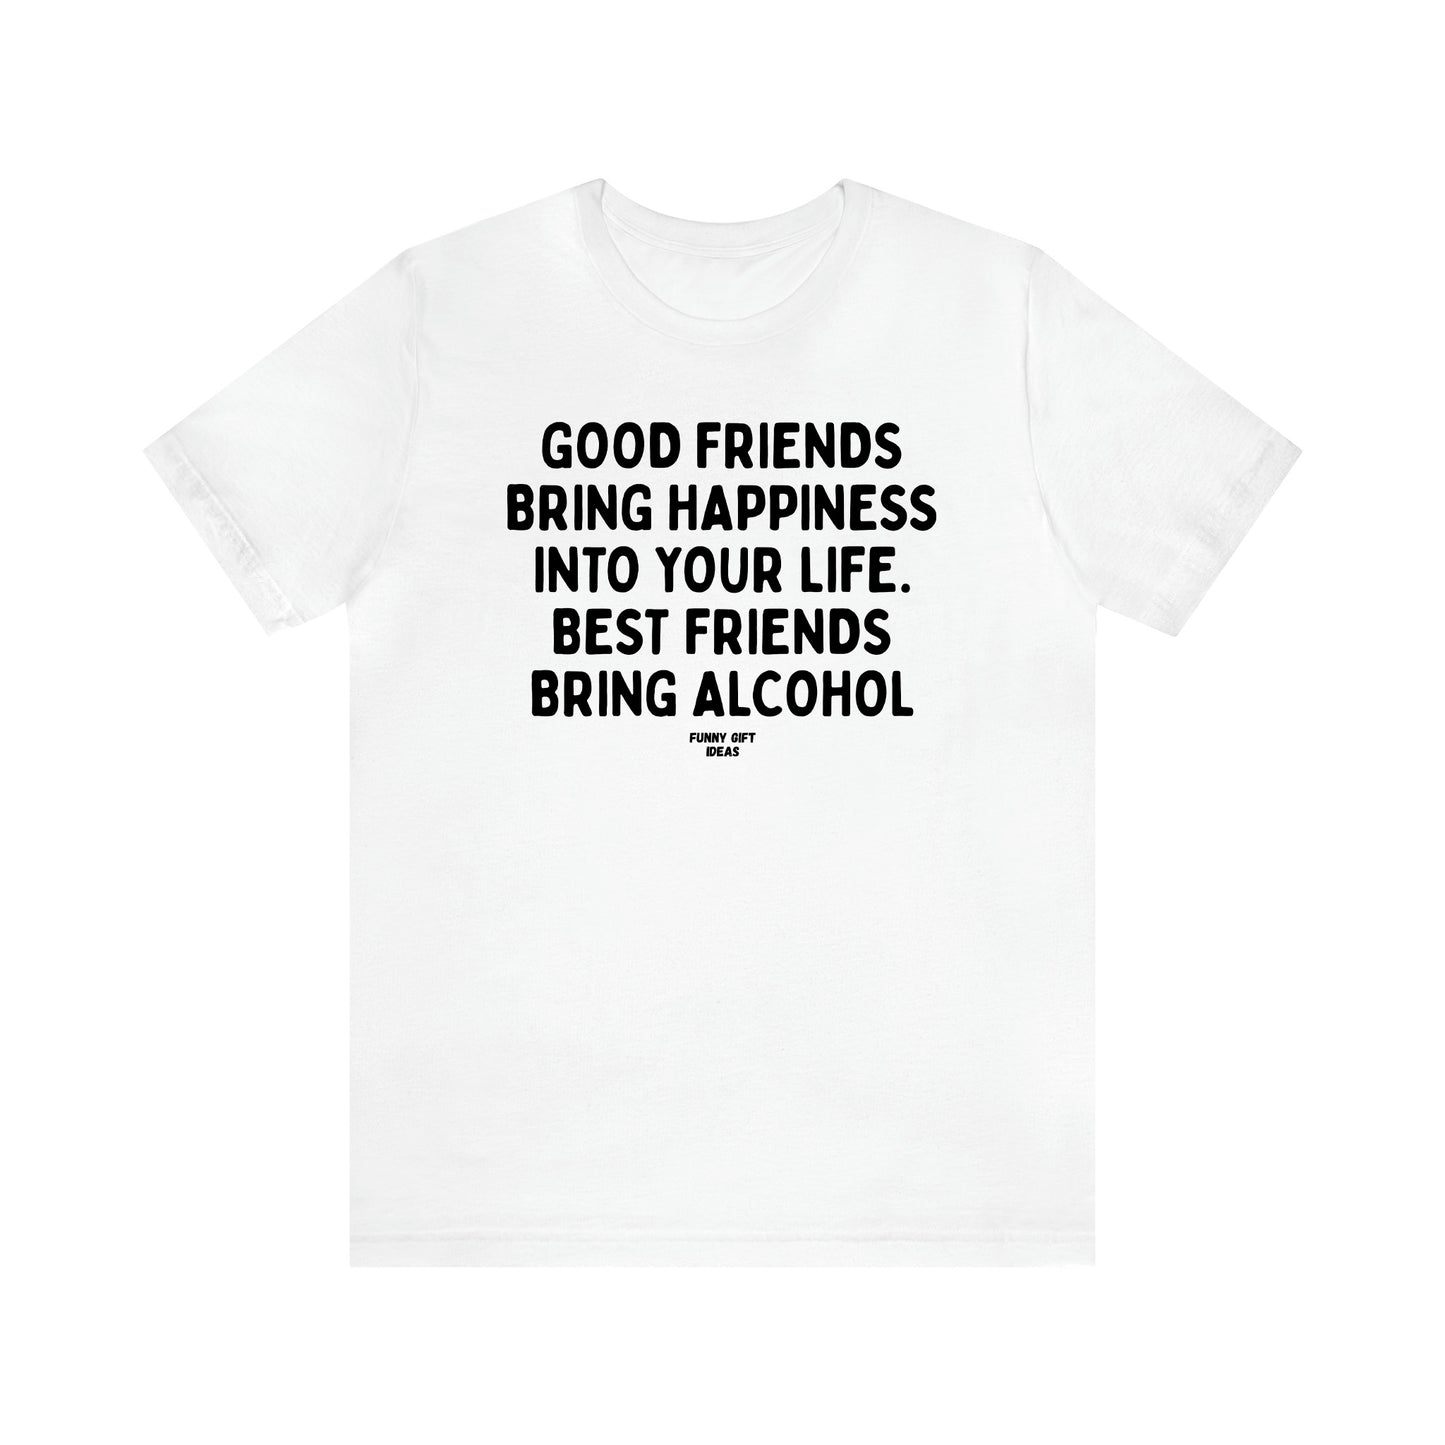 Women's T Shirts Good Friends Bring Happiness Into Your Life. Best Friends Bring Alcohol - Funny Gift Ideas